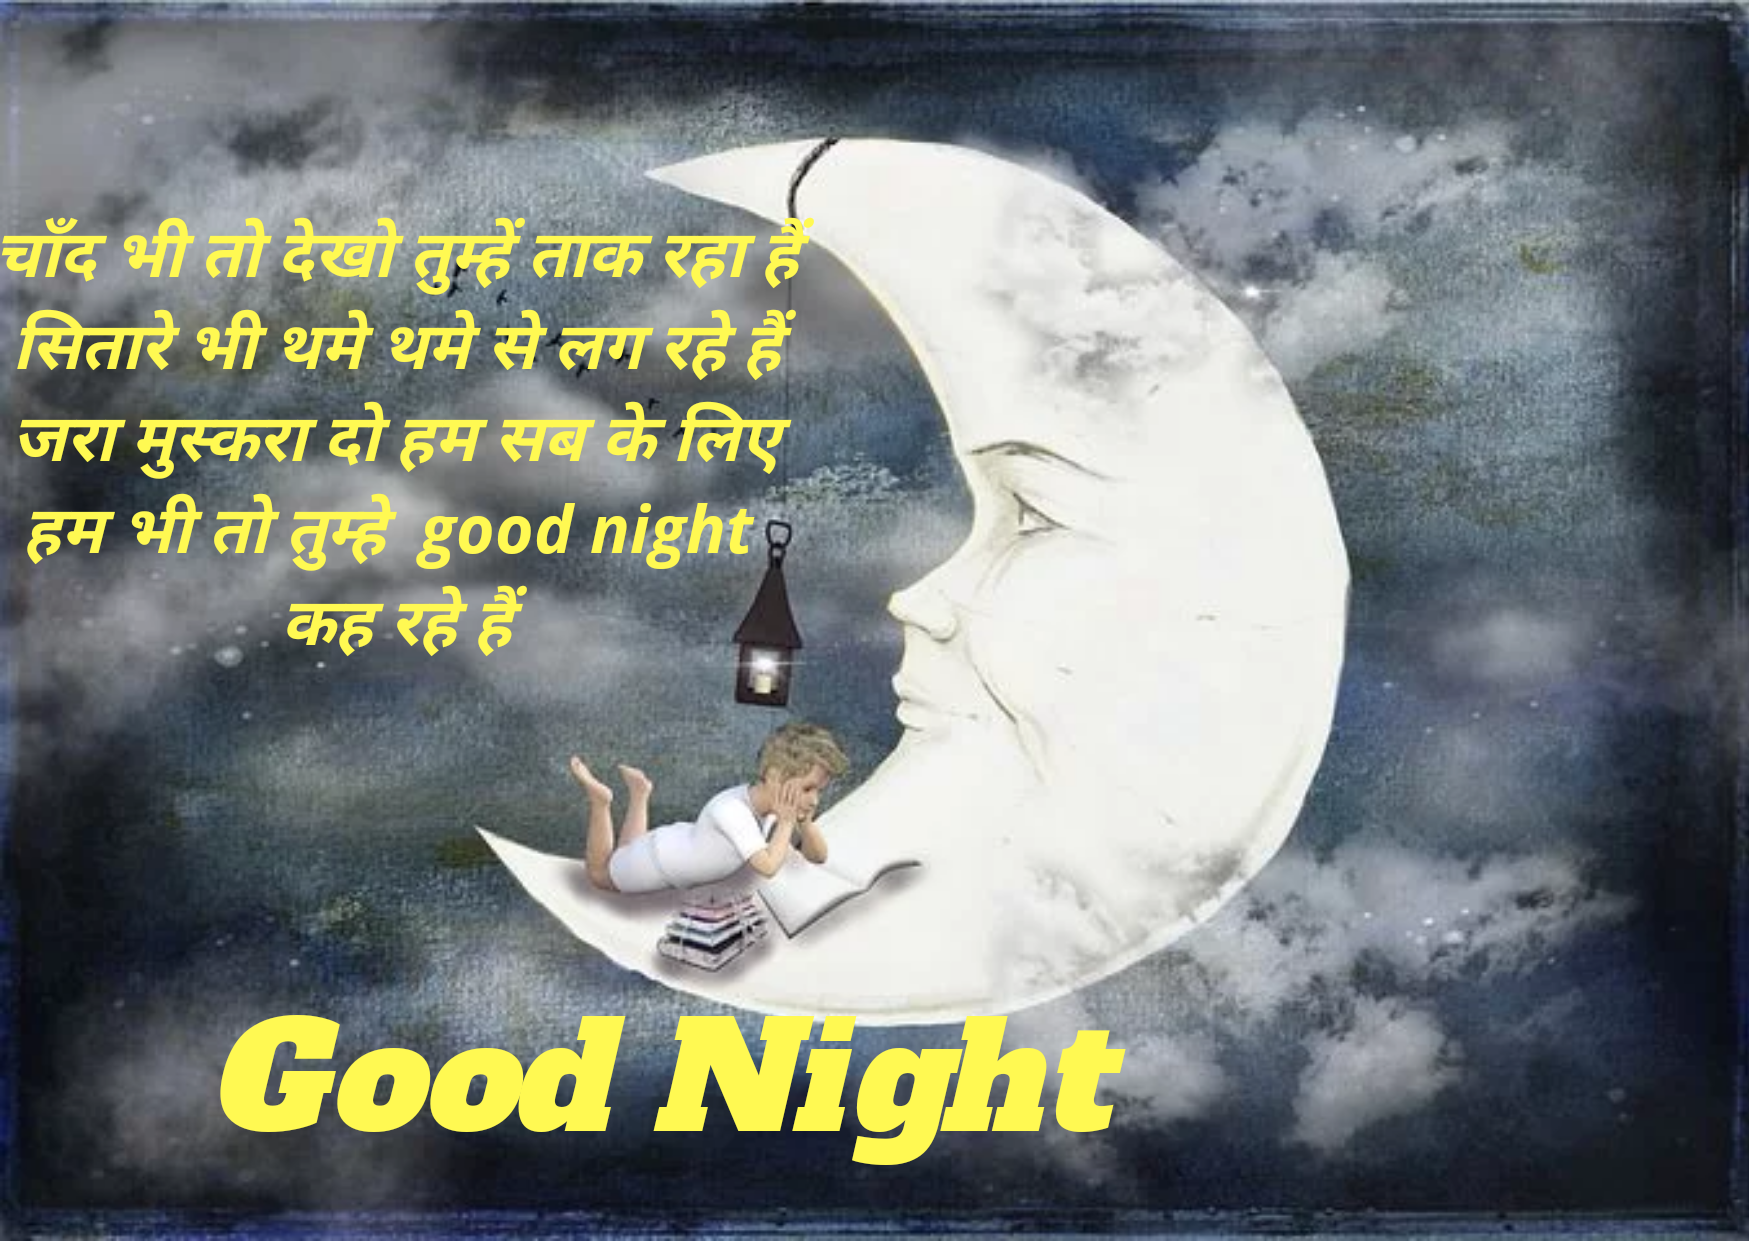 Best Good Night Hindi wishes Status sms Images, Best romantic good night Hindi wishes images for whatsaap free download,